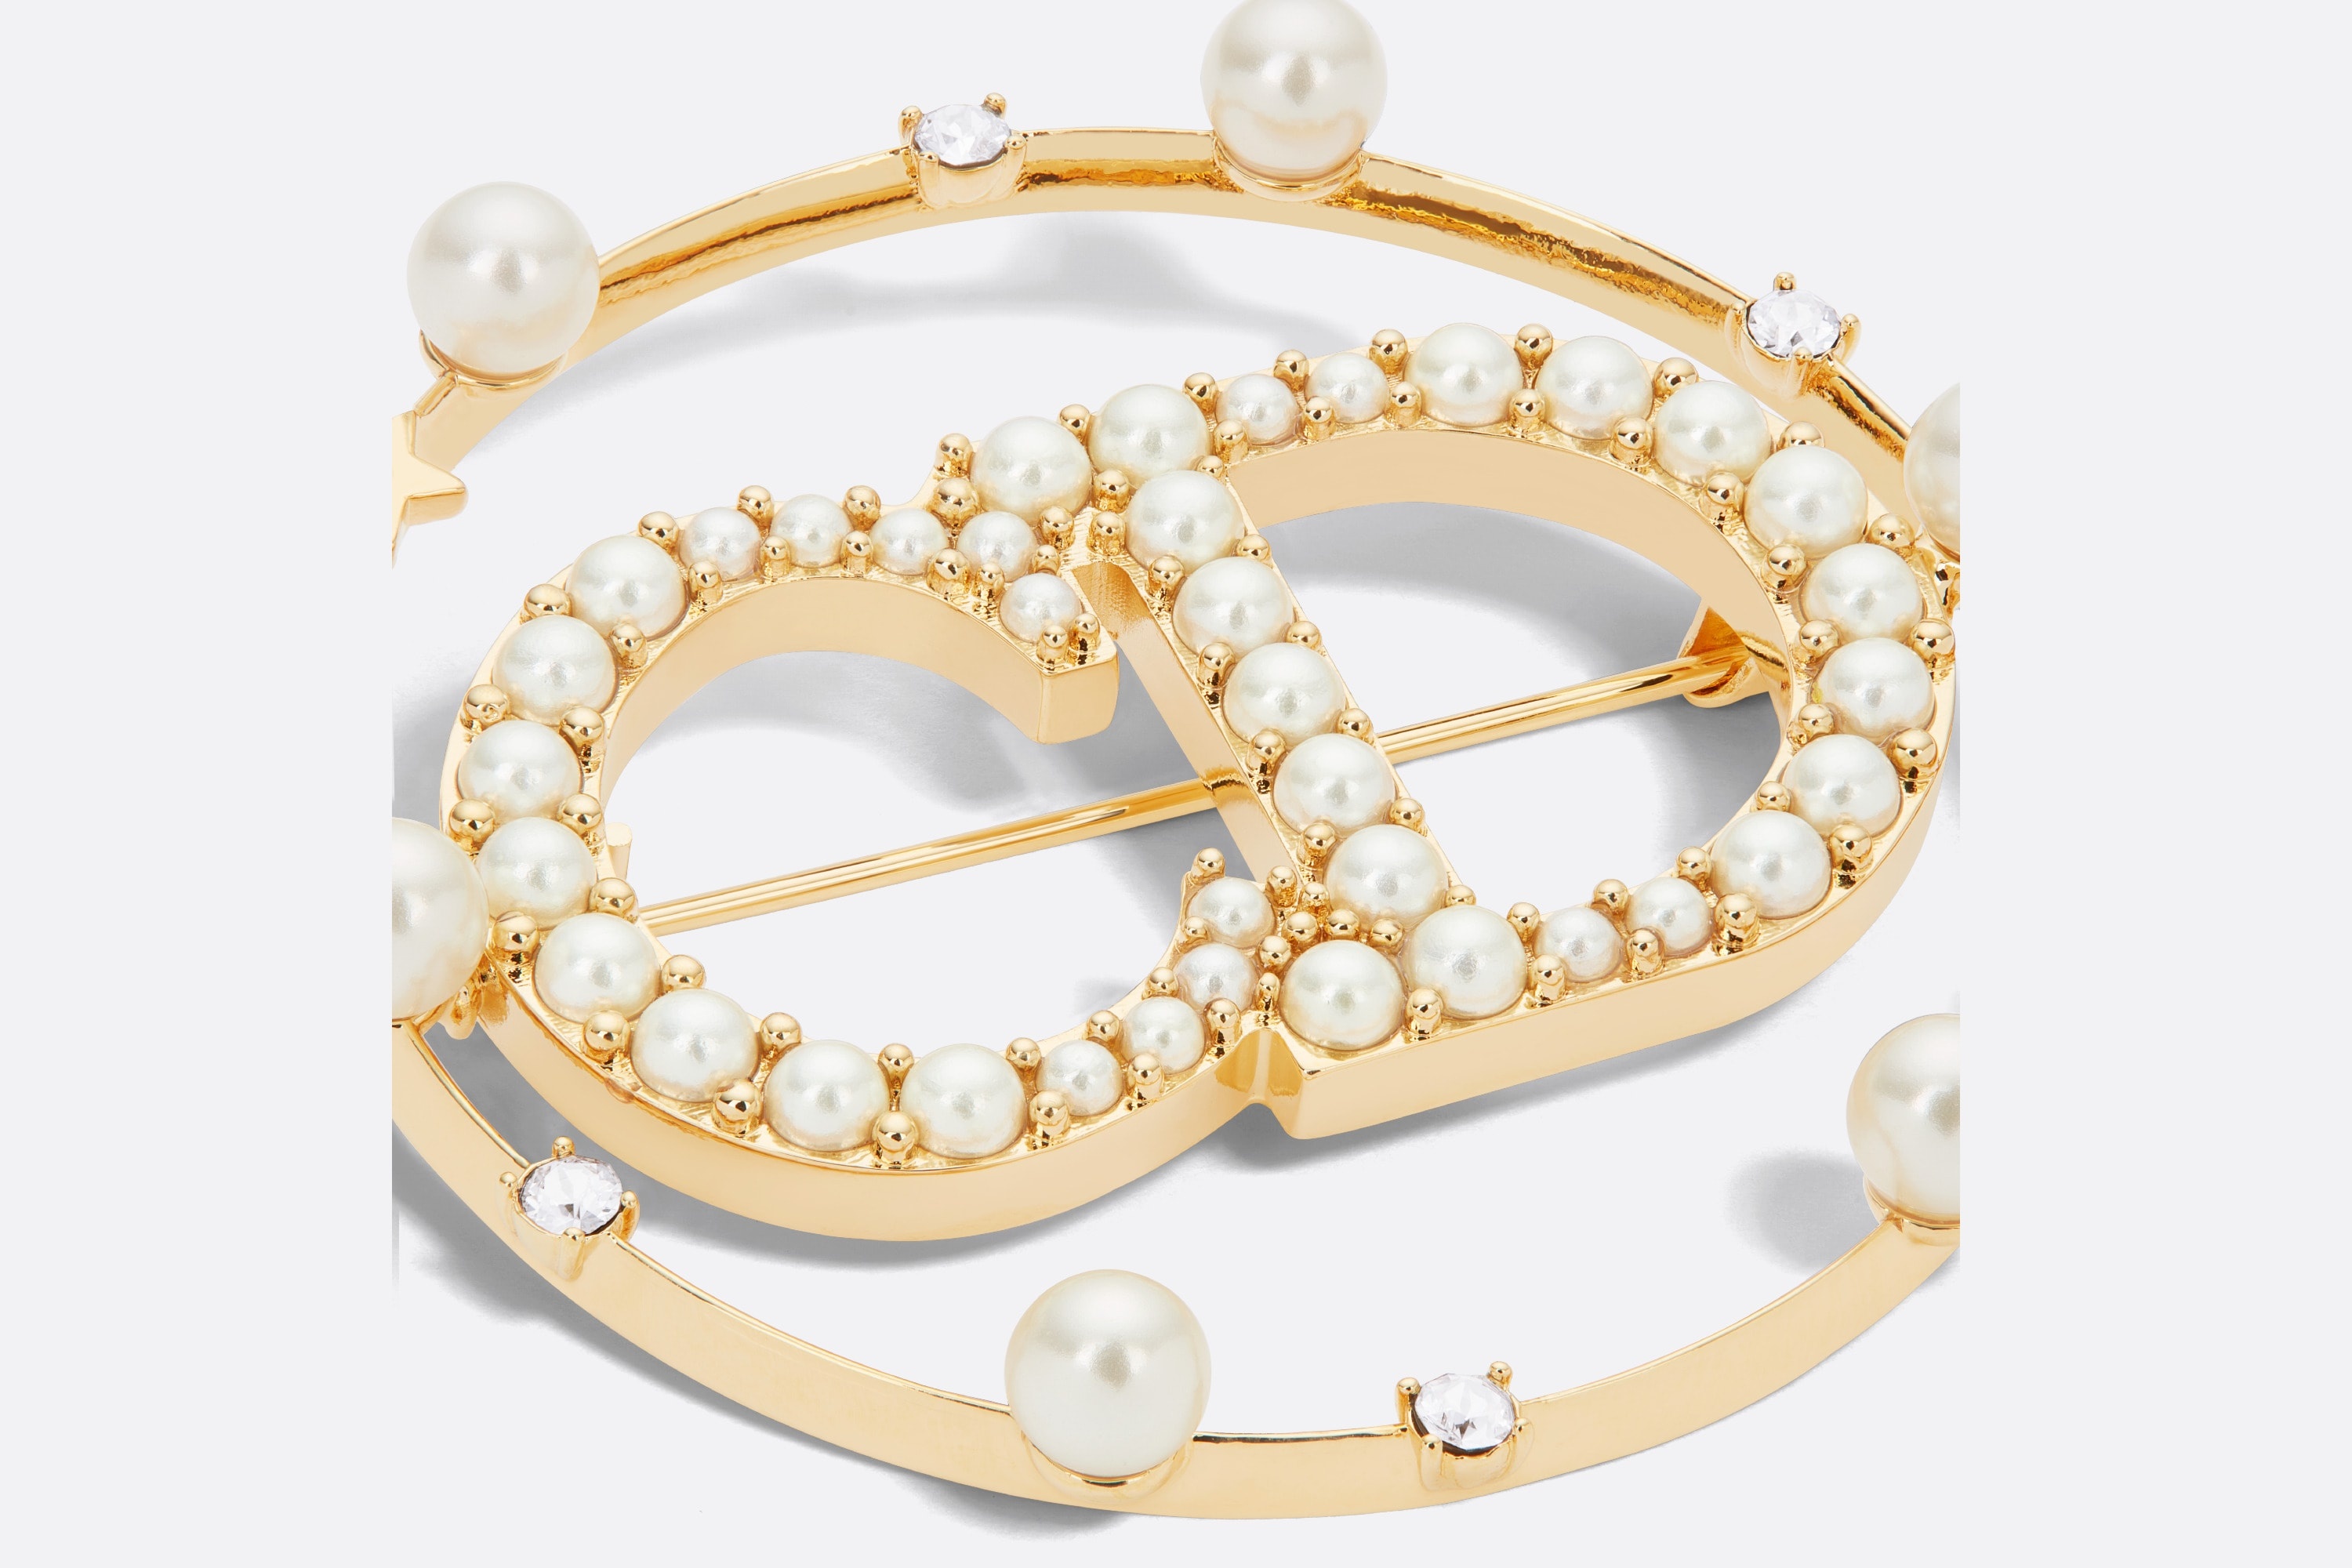 Dior Clair D Lune Brooch | REVERSIBLE